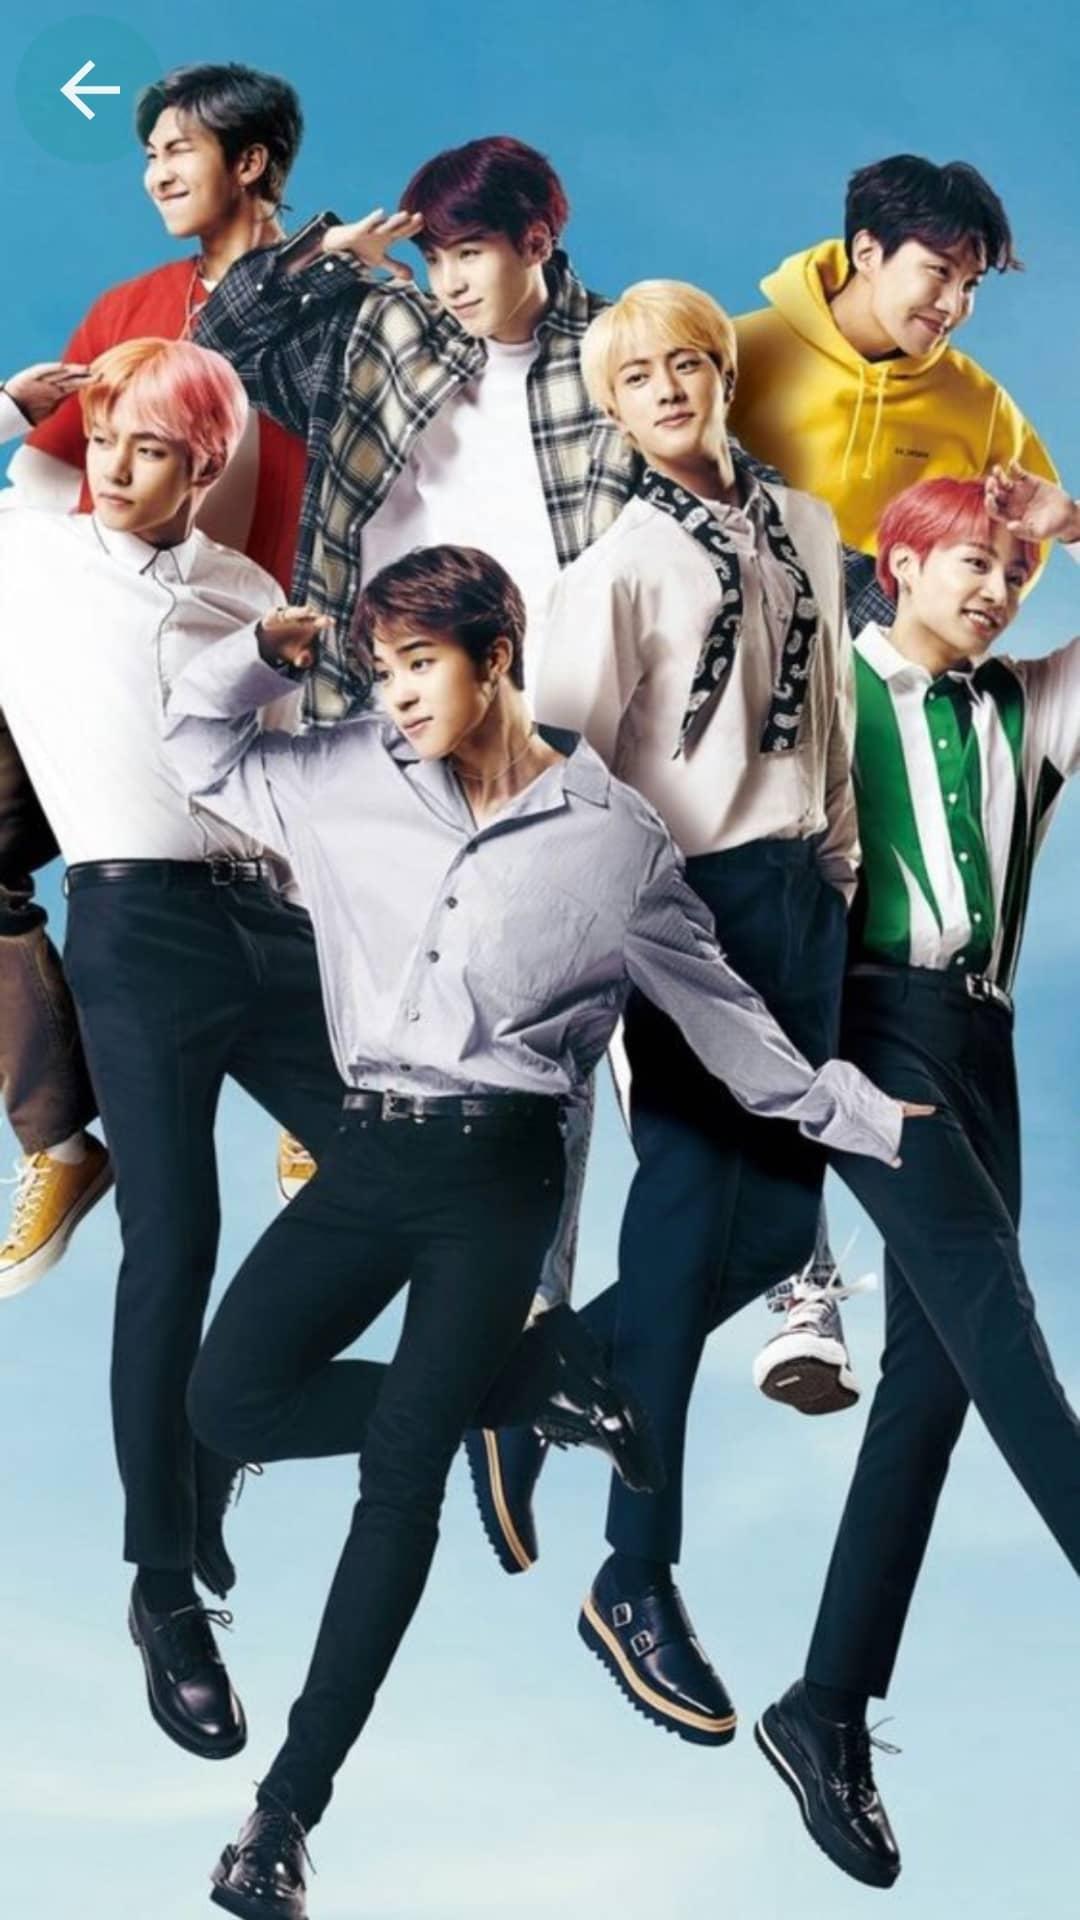 1080 x 1920 · jpeg - New BTS Wallpapers - Kpop Wallpaper HD 2019 for Android - APK Download